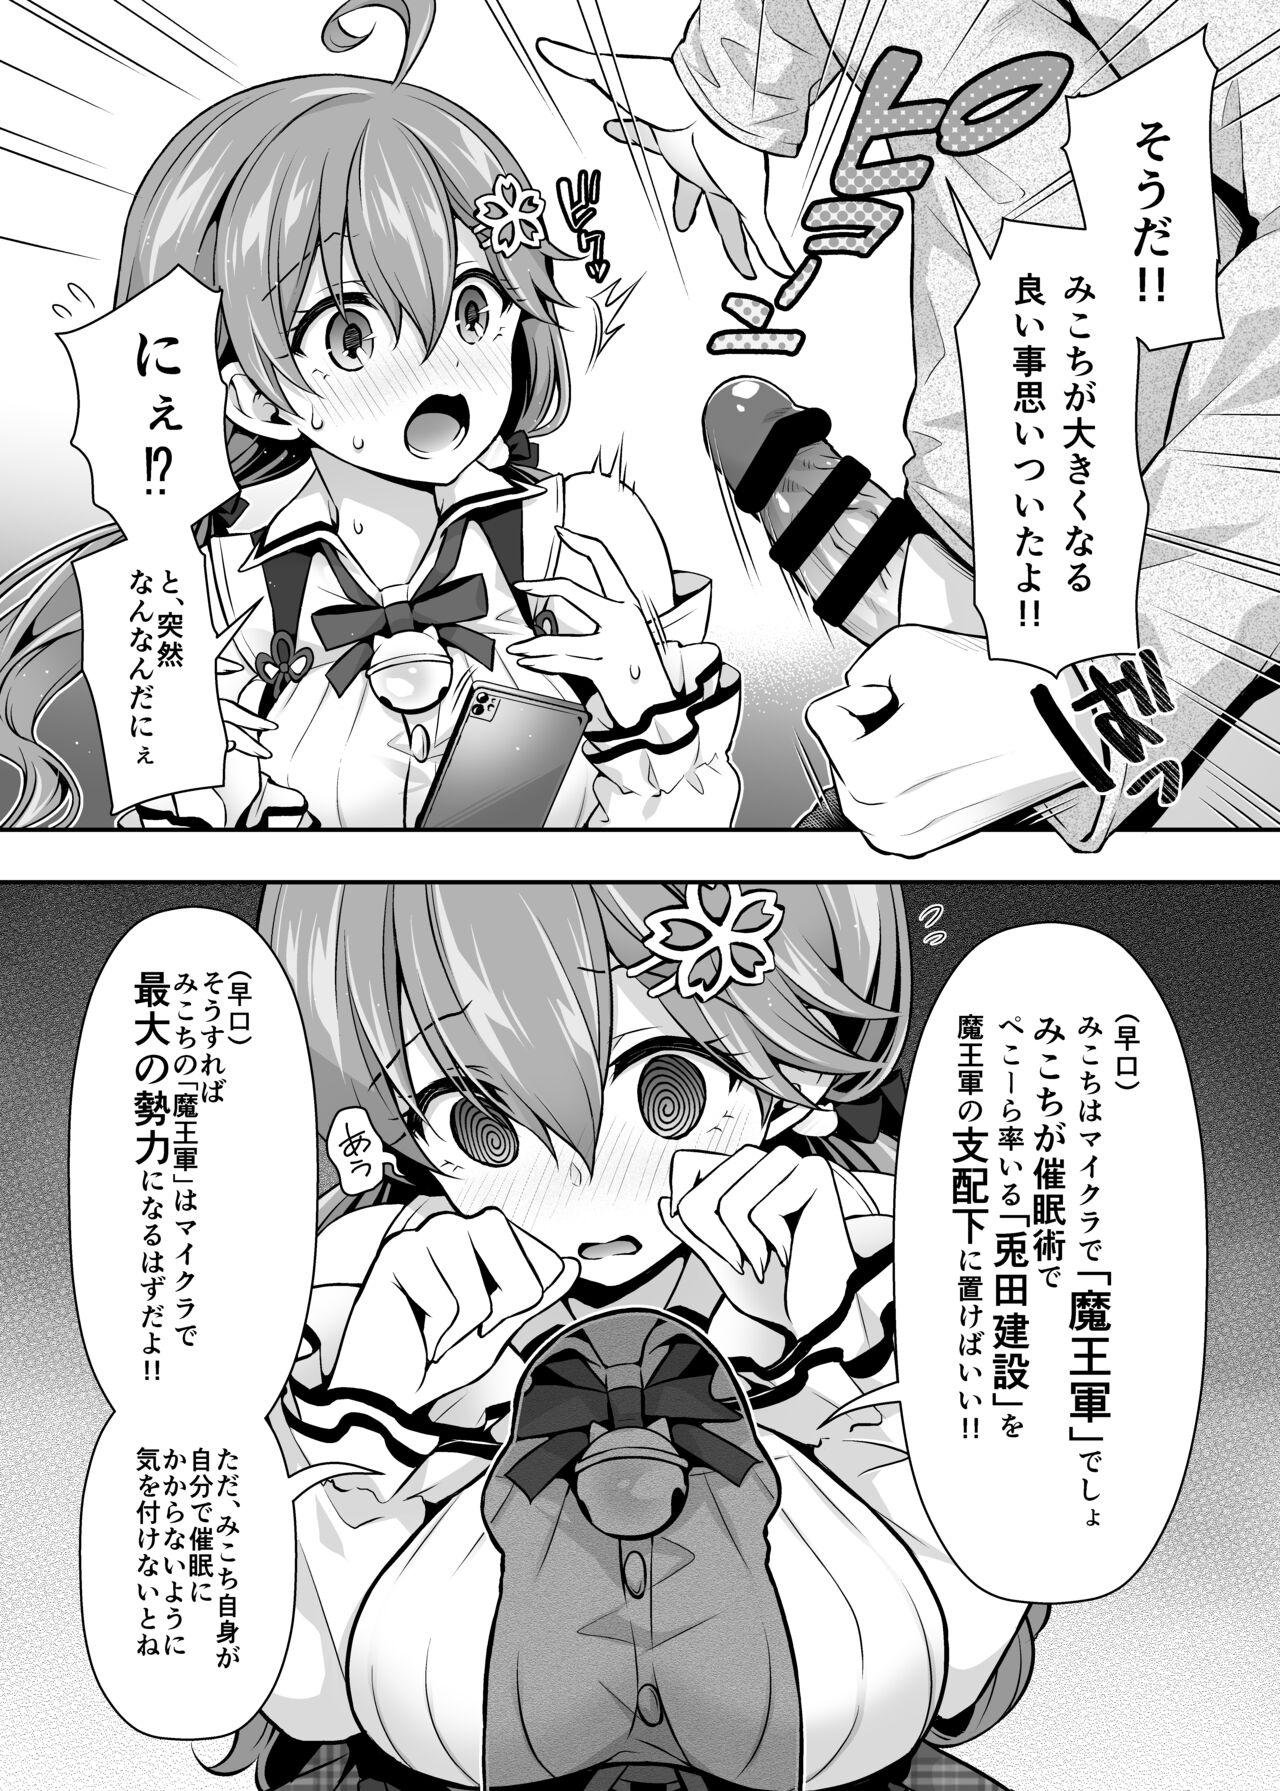 Double Penetration みこち催眠えっち本2 ～悪魔的所業編～ - Hololive Dominant - Page 5